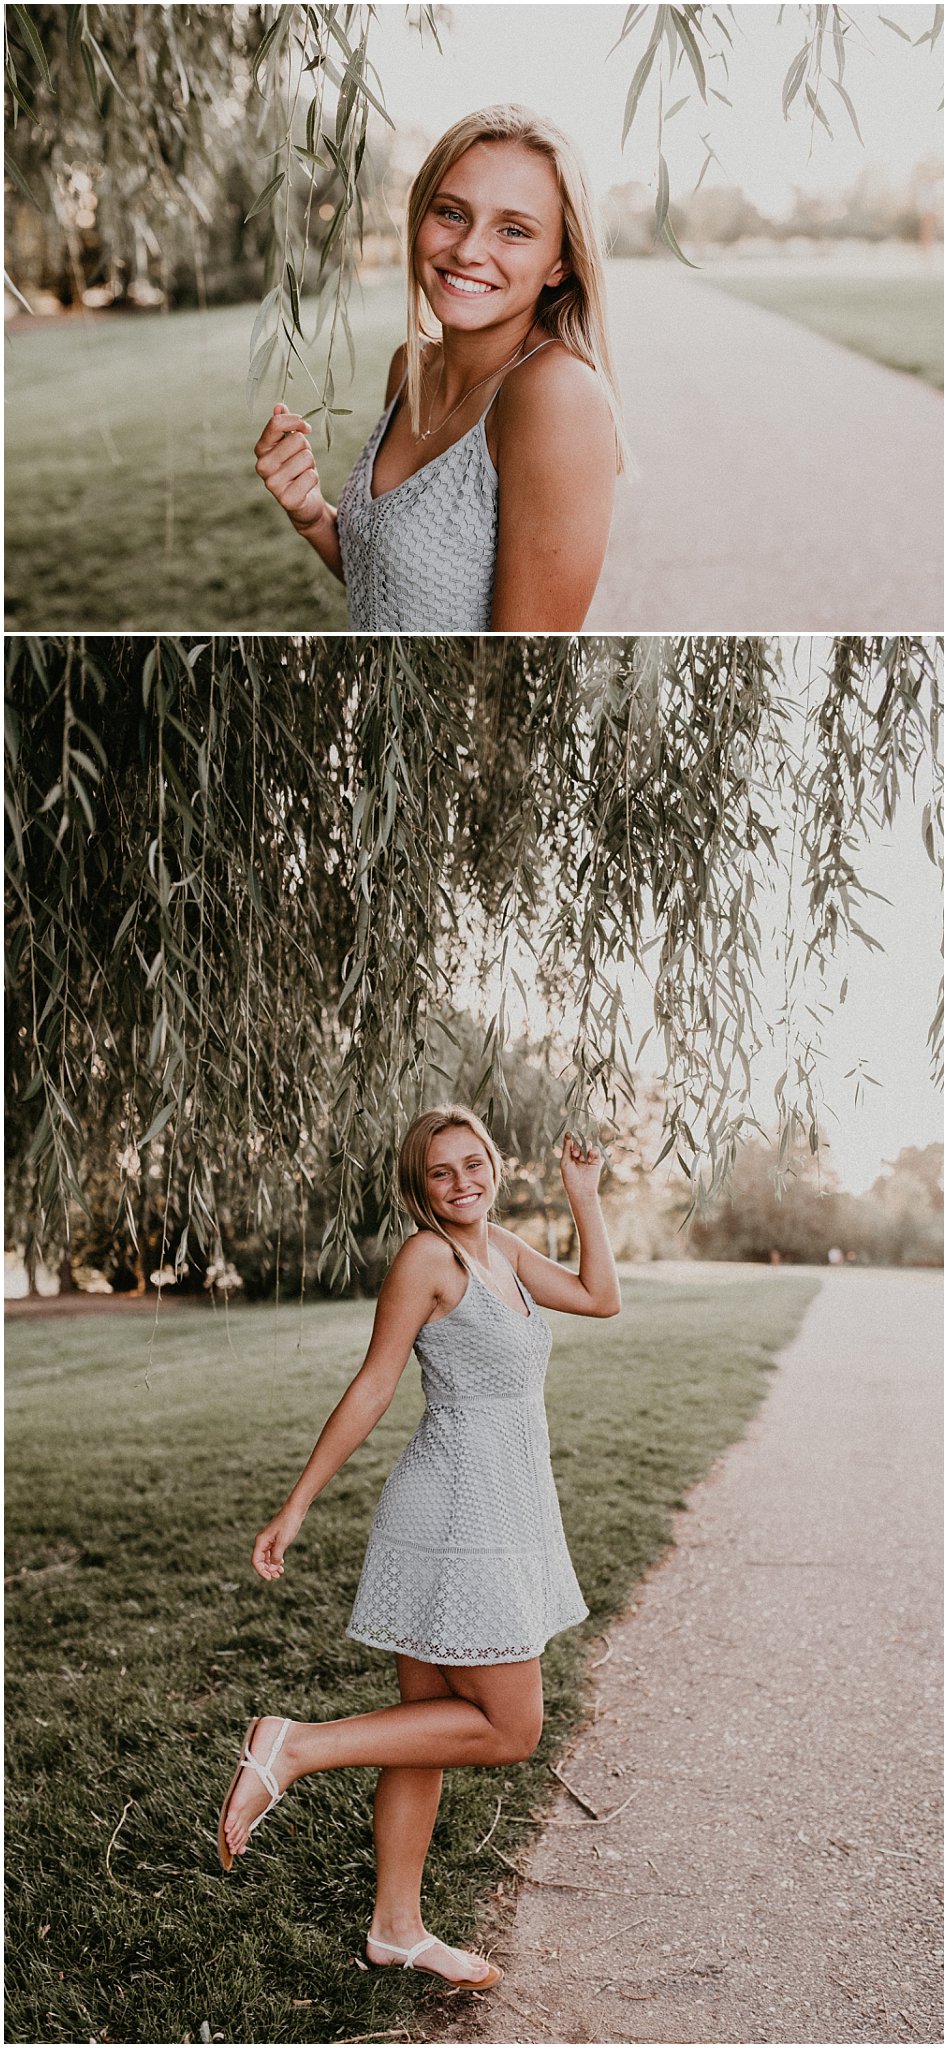 Boise Senior Photographer Makayla Madden Photography Kuna River Summer Senior Pictures Dress Outfit Ideas Beautiful Class of 2018 Freckles Laughter Idaho Photographer Willow Trees